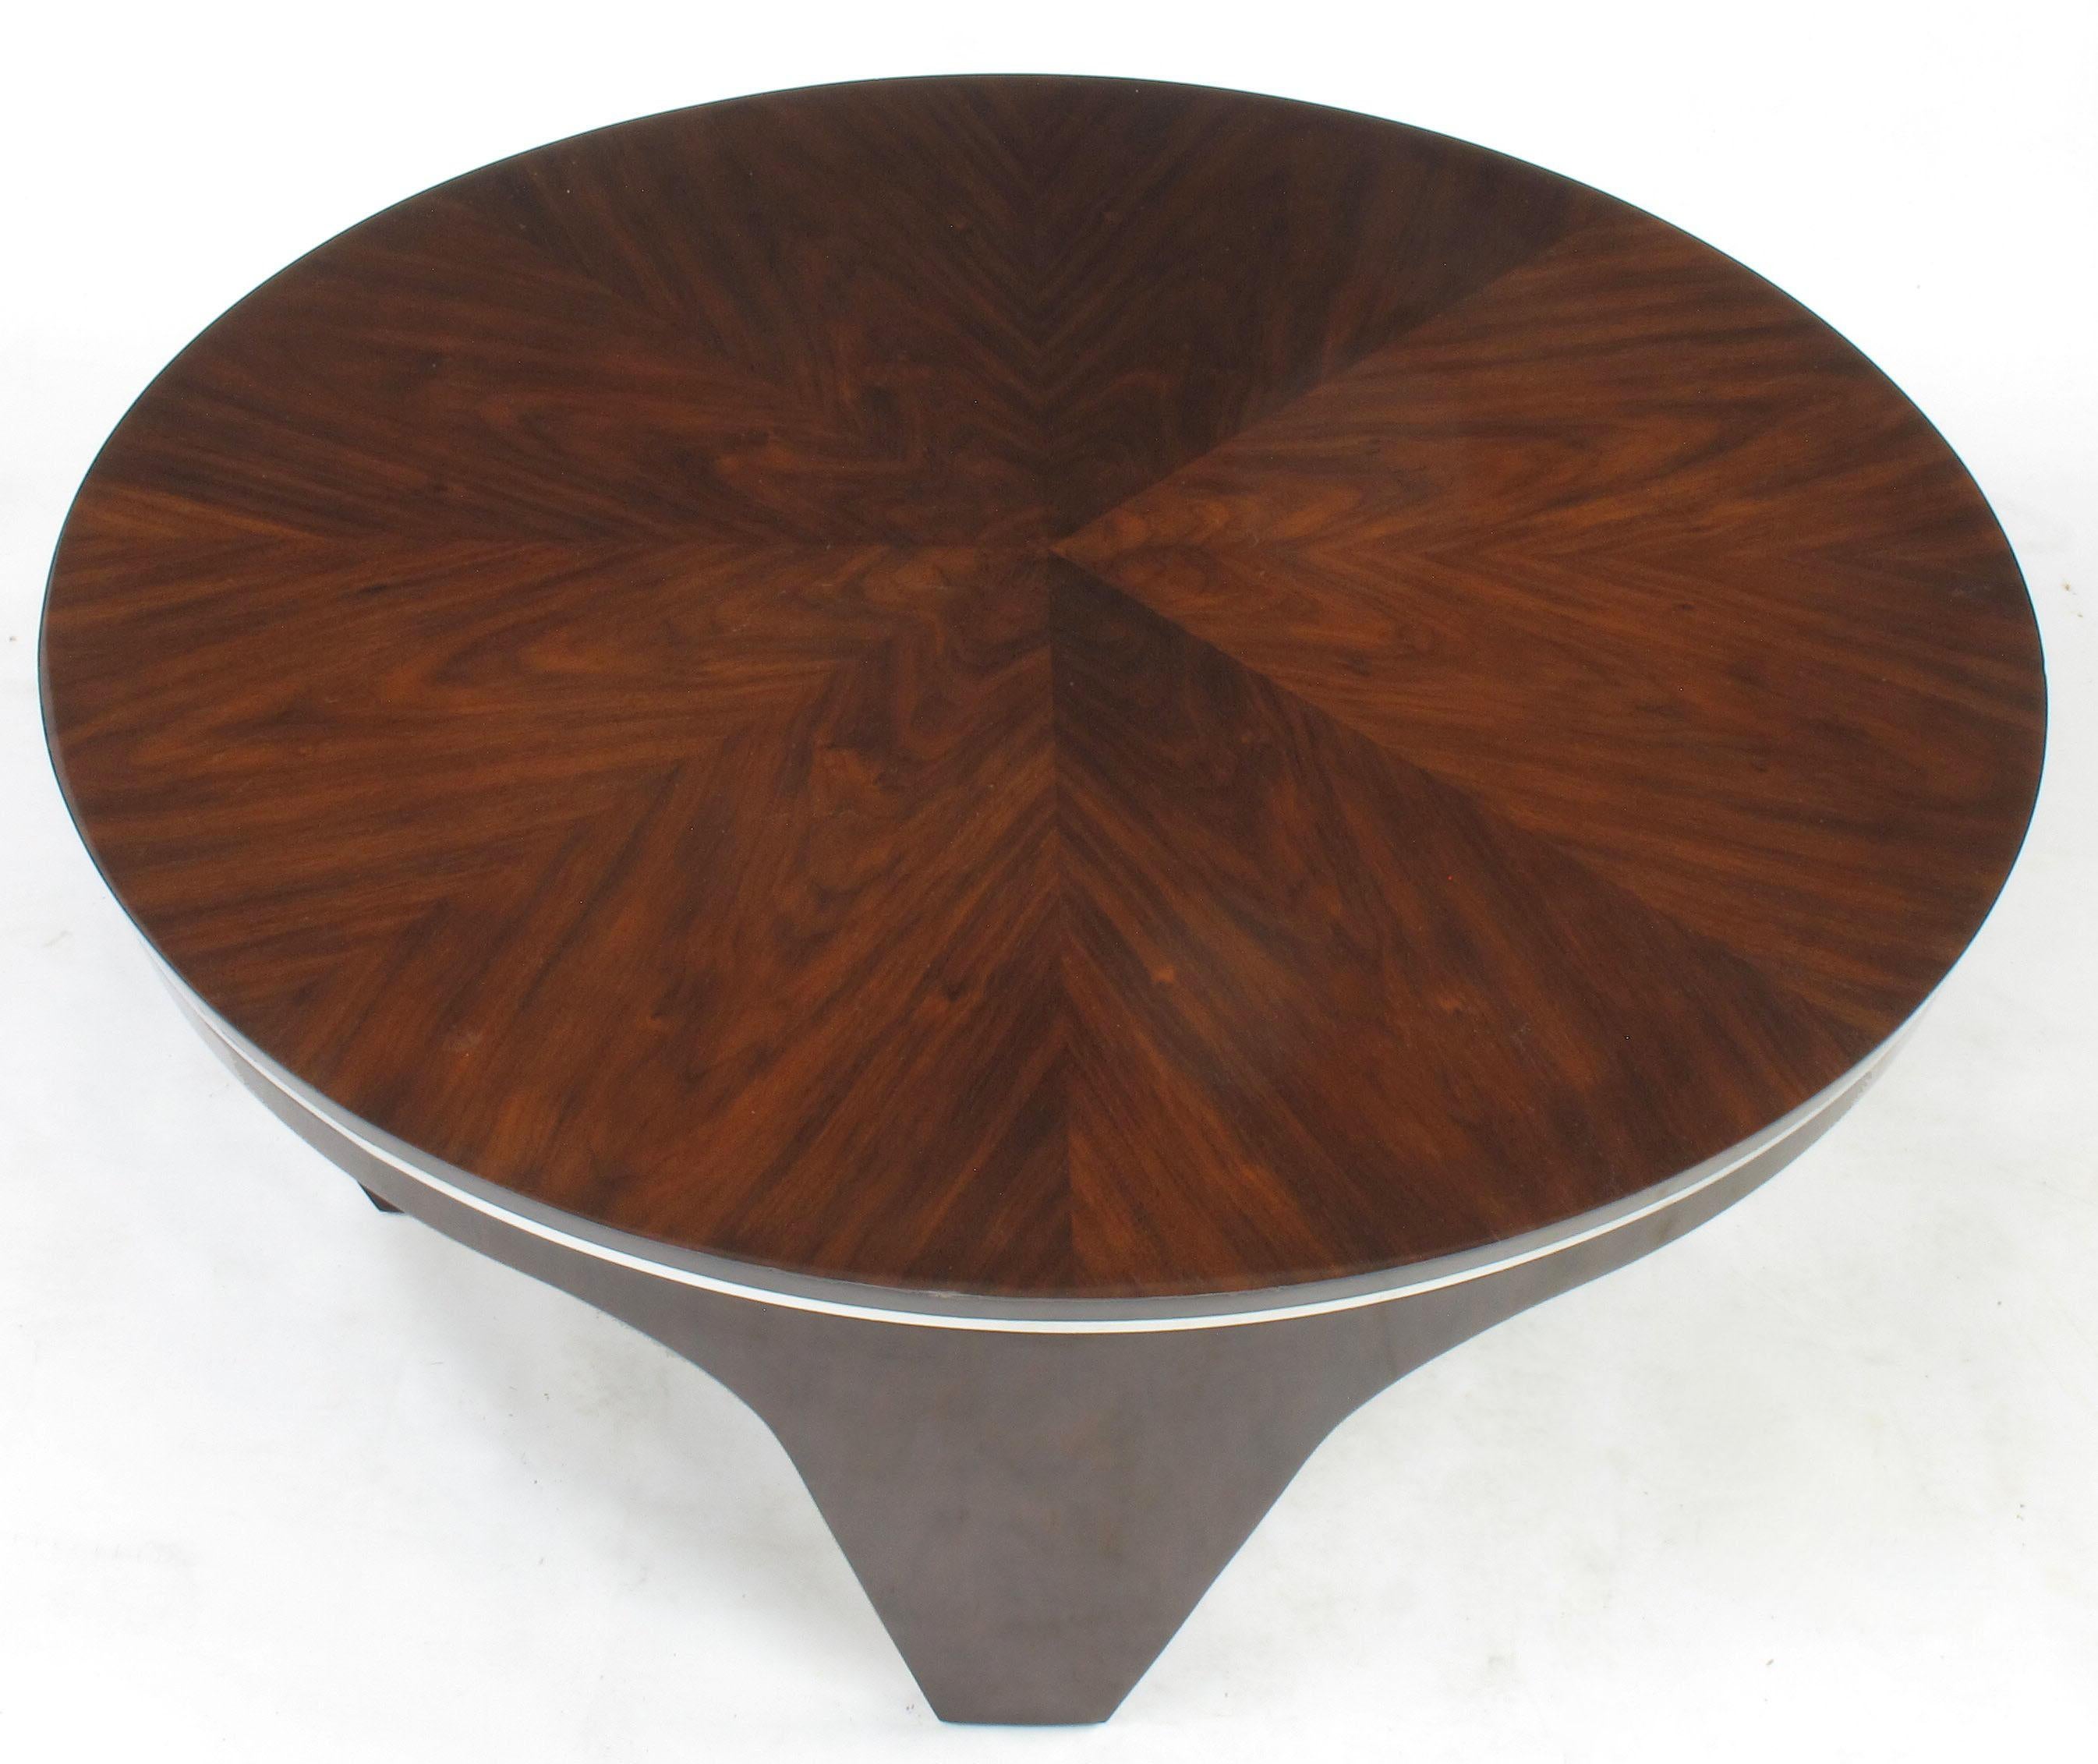 Italian Art Deco Revival Round Mahogany Coffee Table with Parquetry Top 1